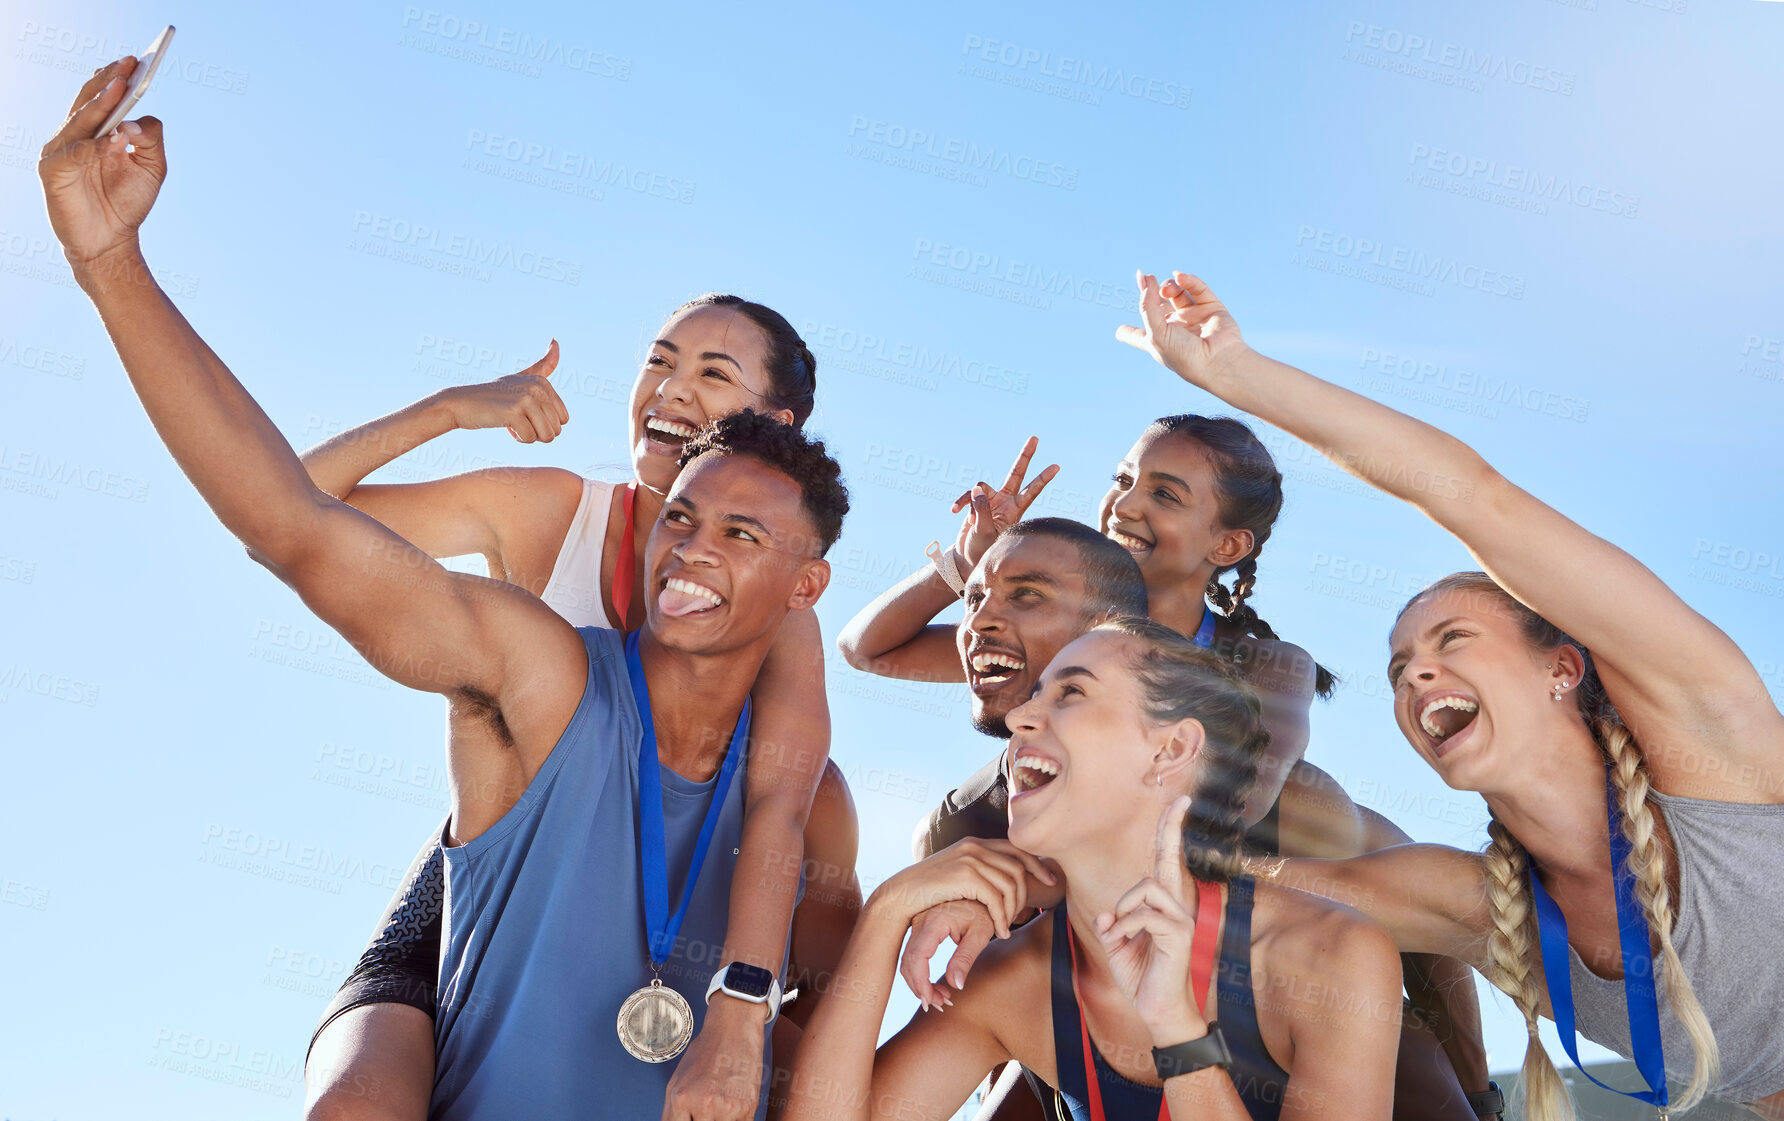 Buy stock photo Group of diverse olympic athletes taking a selfie while having fun and showing hand gestures. Happy and cheerful runners taking a photo together. Young male sprinter taking a picture with athletes